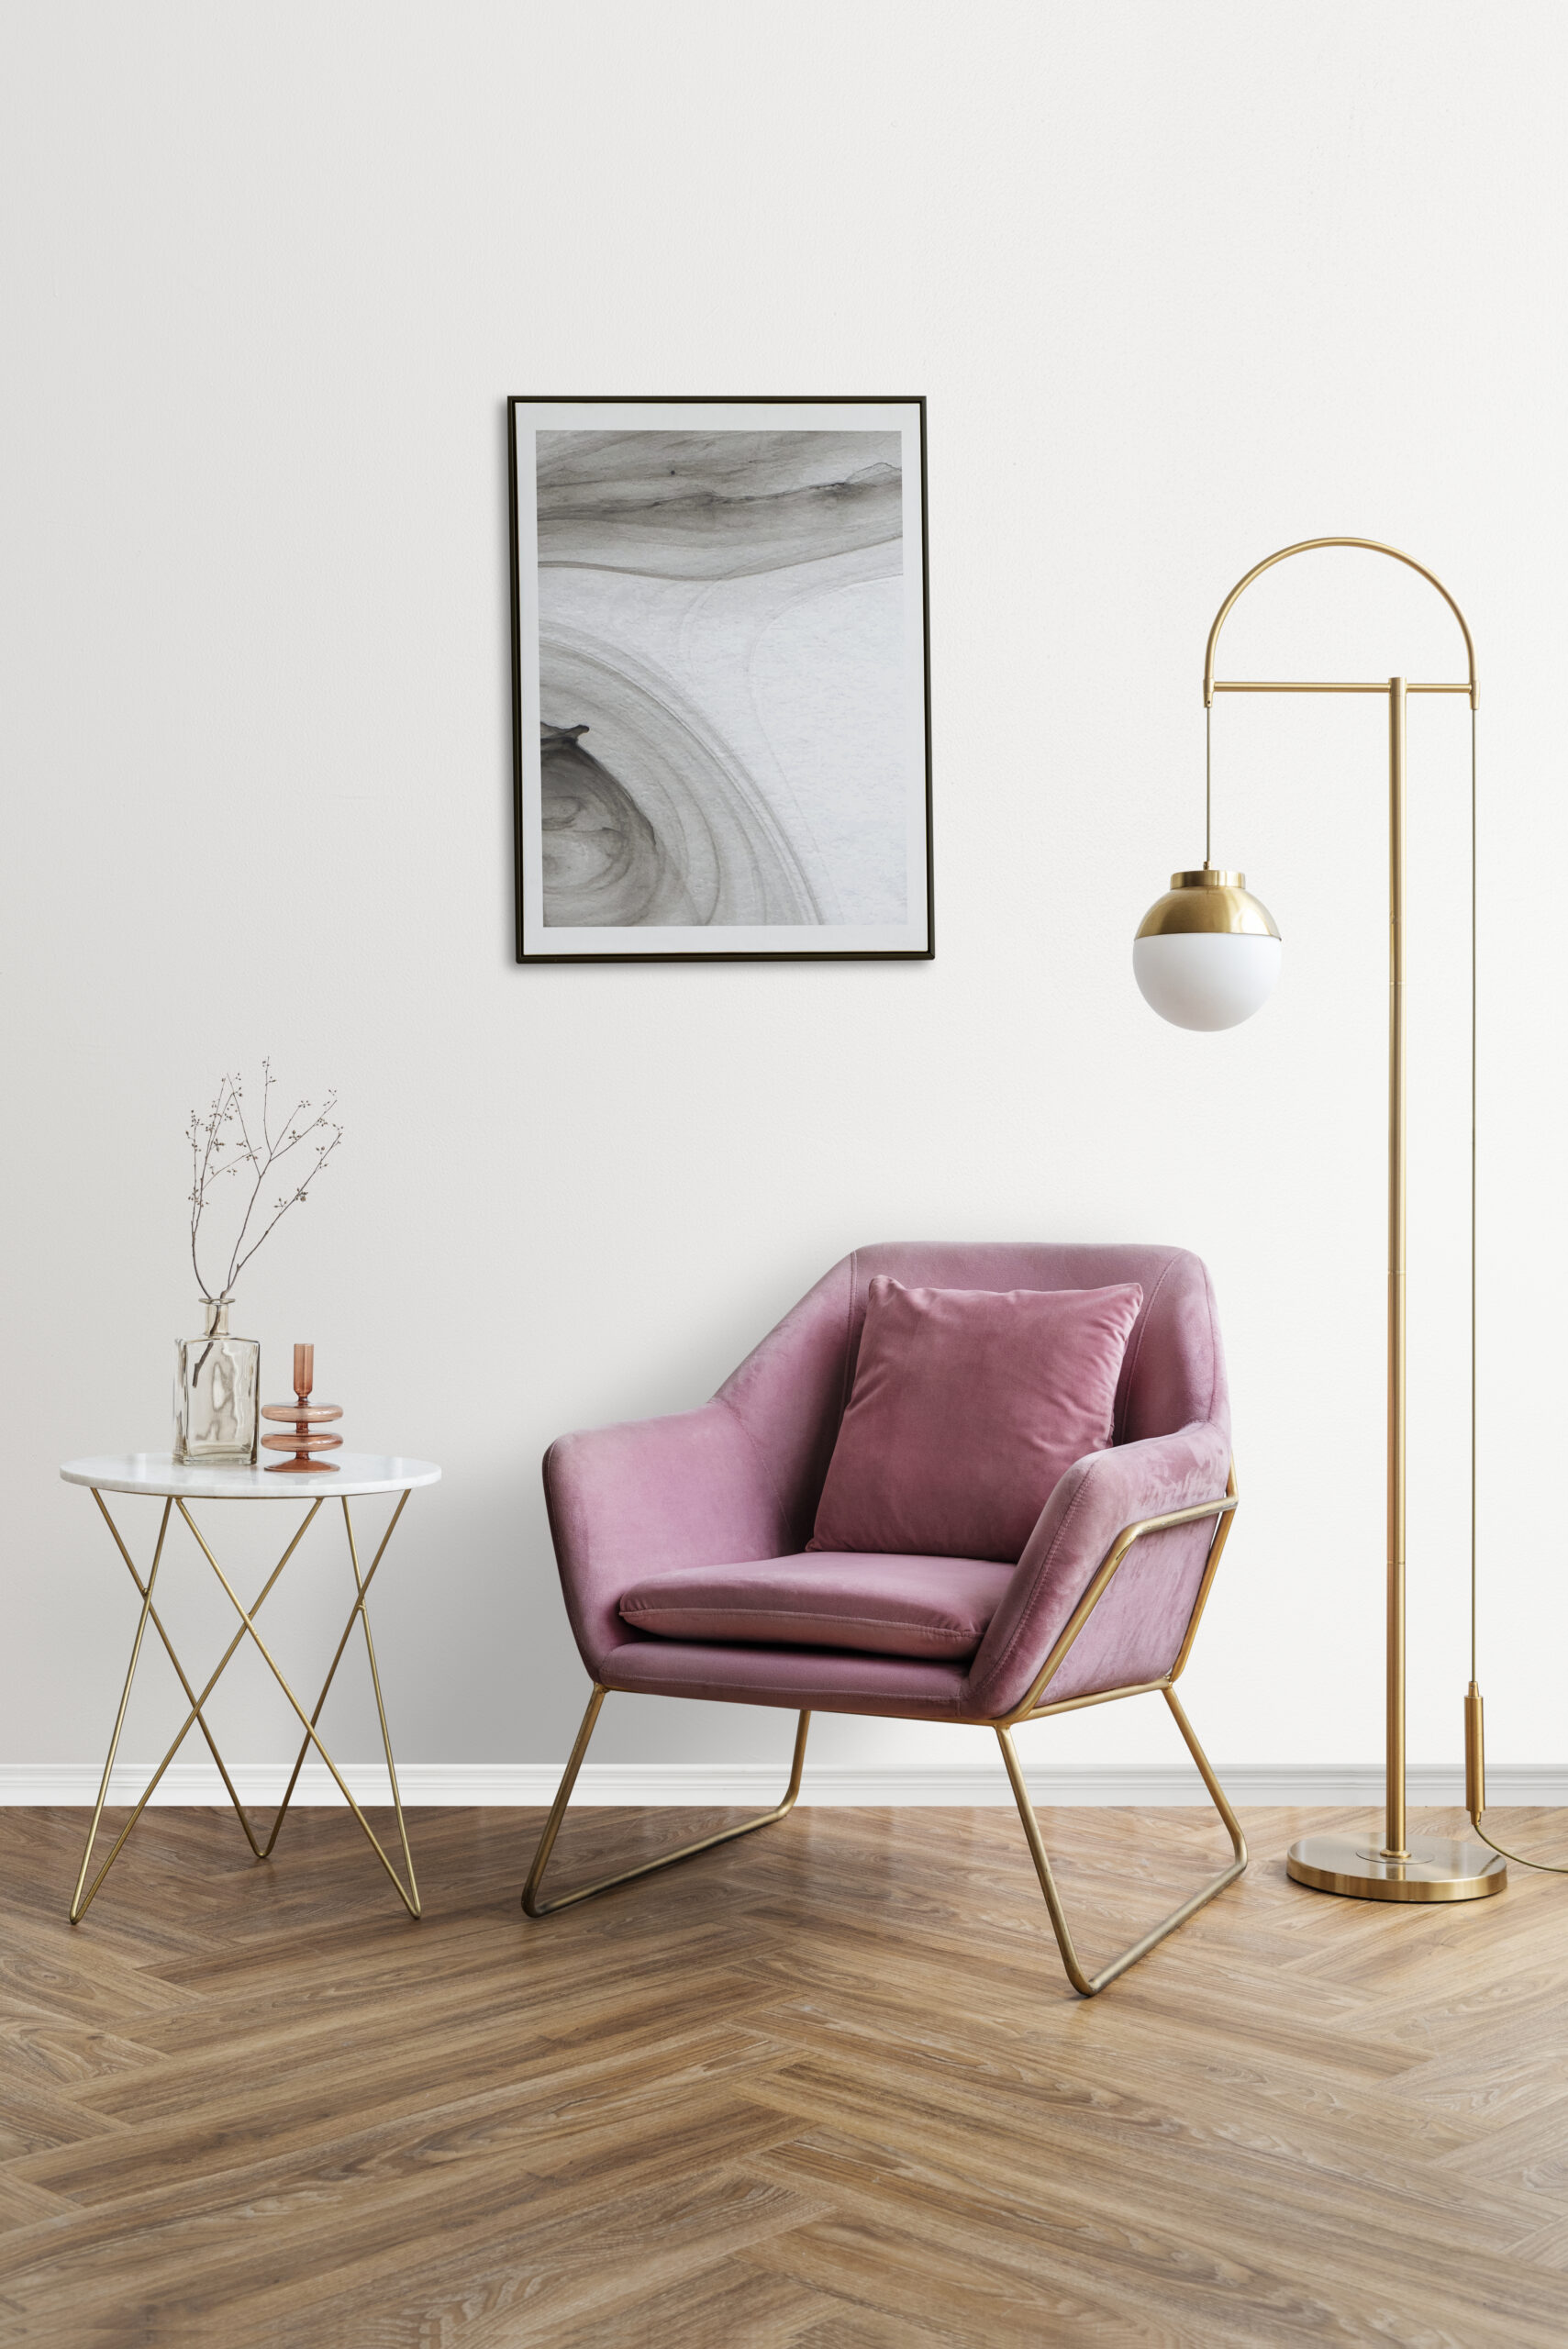 picture-frame-with-abstract-art-by-pink-velvet-armchair-scaled Acasa